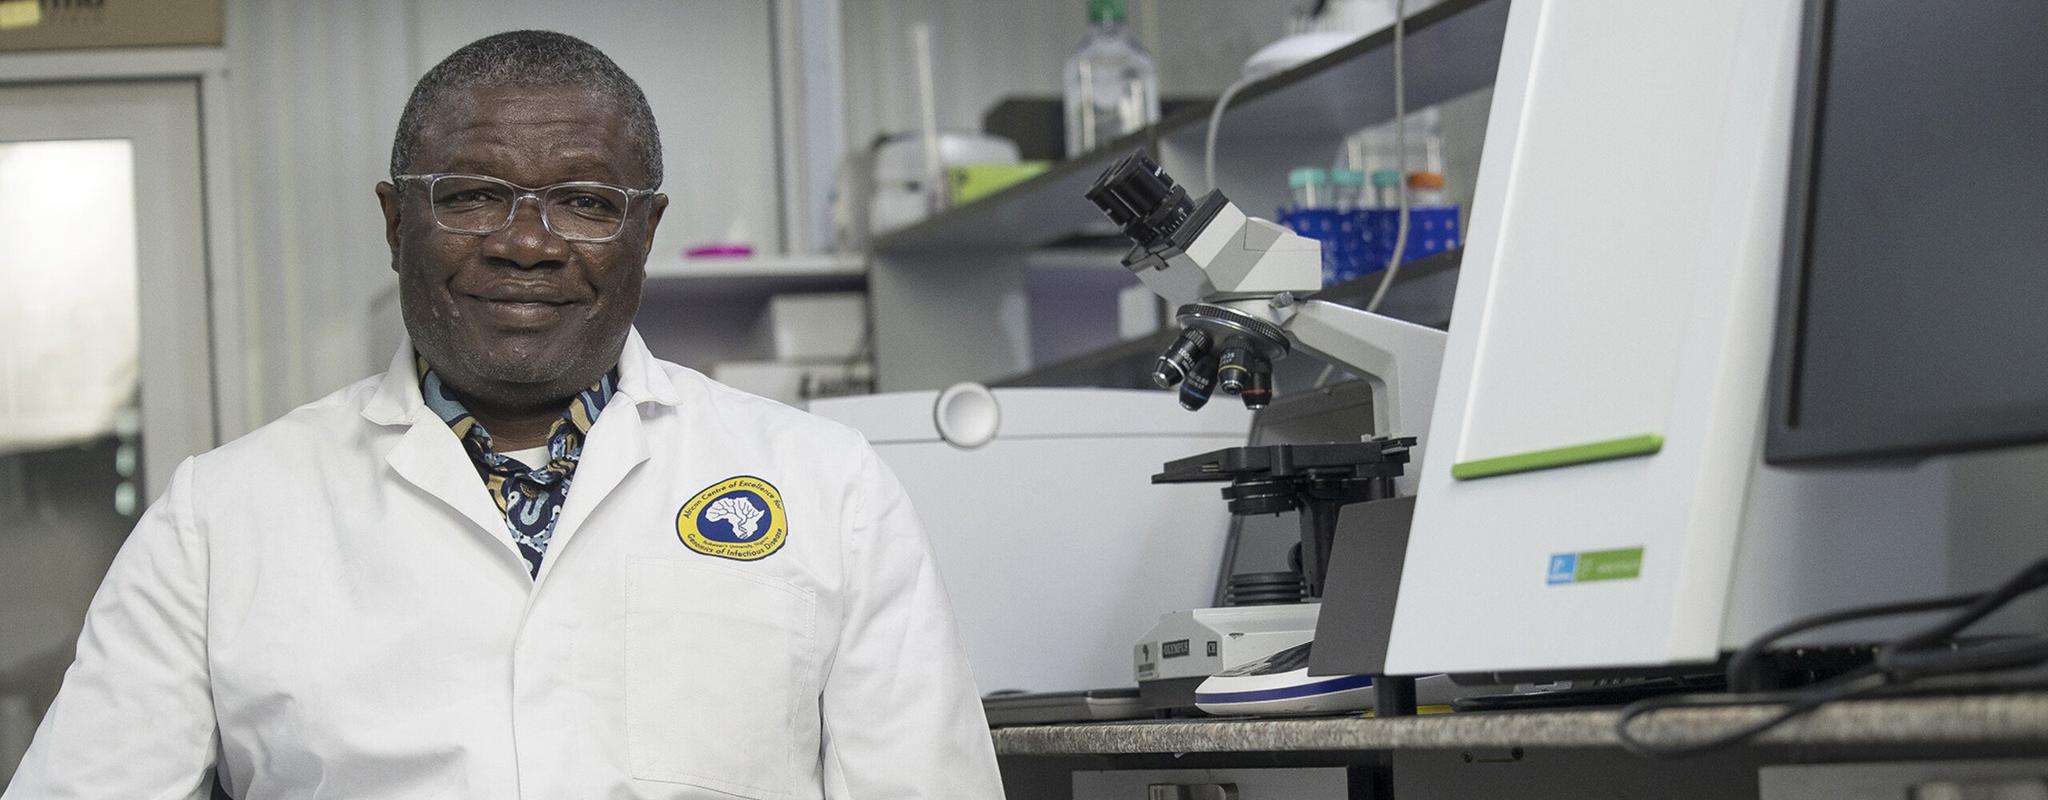 Dr Christian Happi is sat in his lab, wearing a labcoat and surrounded by equipment.